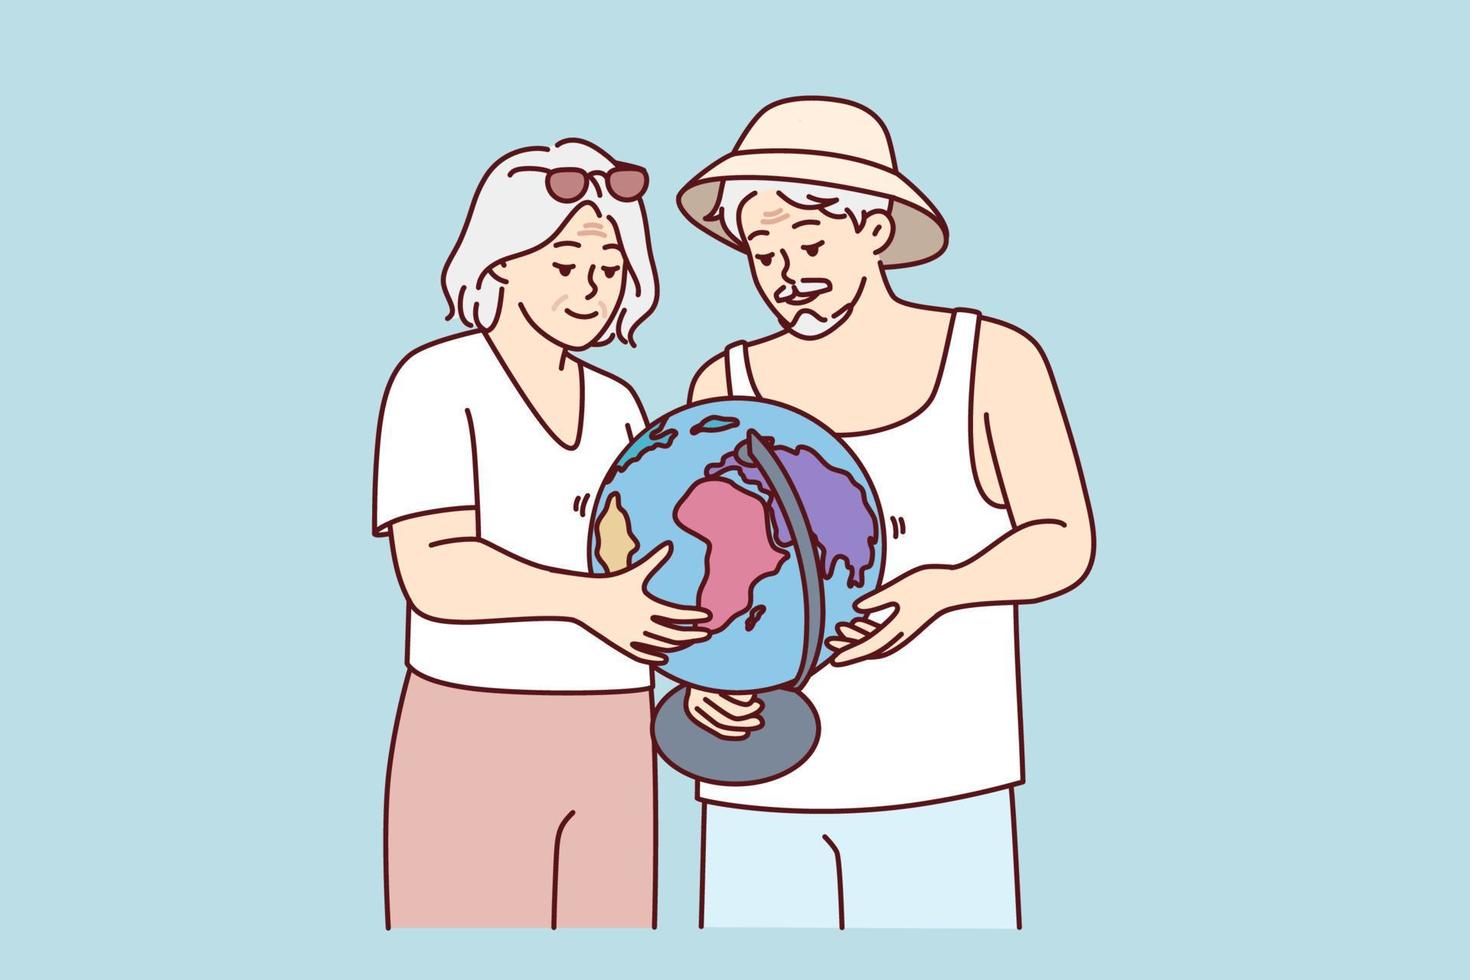 Elderly couple is considering globe choosing place for future trip or sightseeing tour. Mature gray-haired man and woman choose continent or state for life after retirement. Flat vector illustration